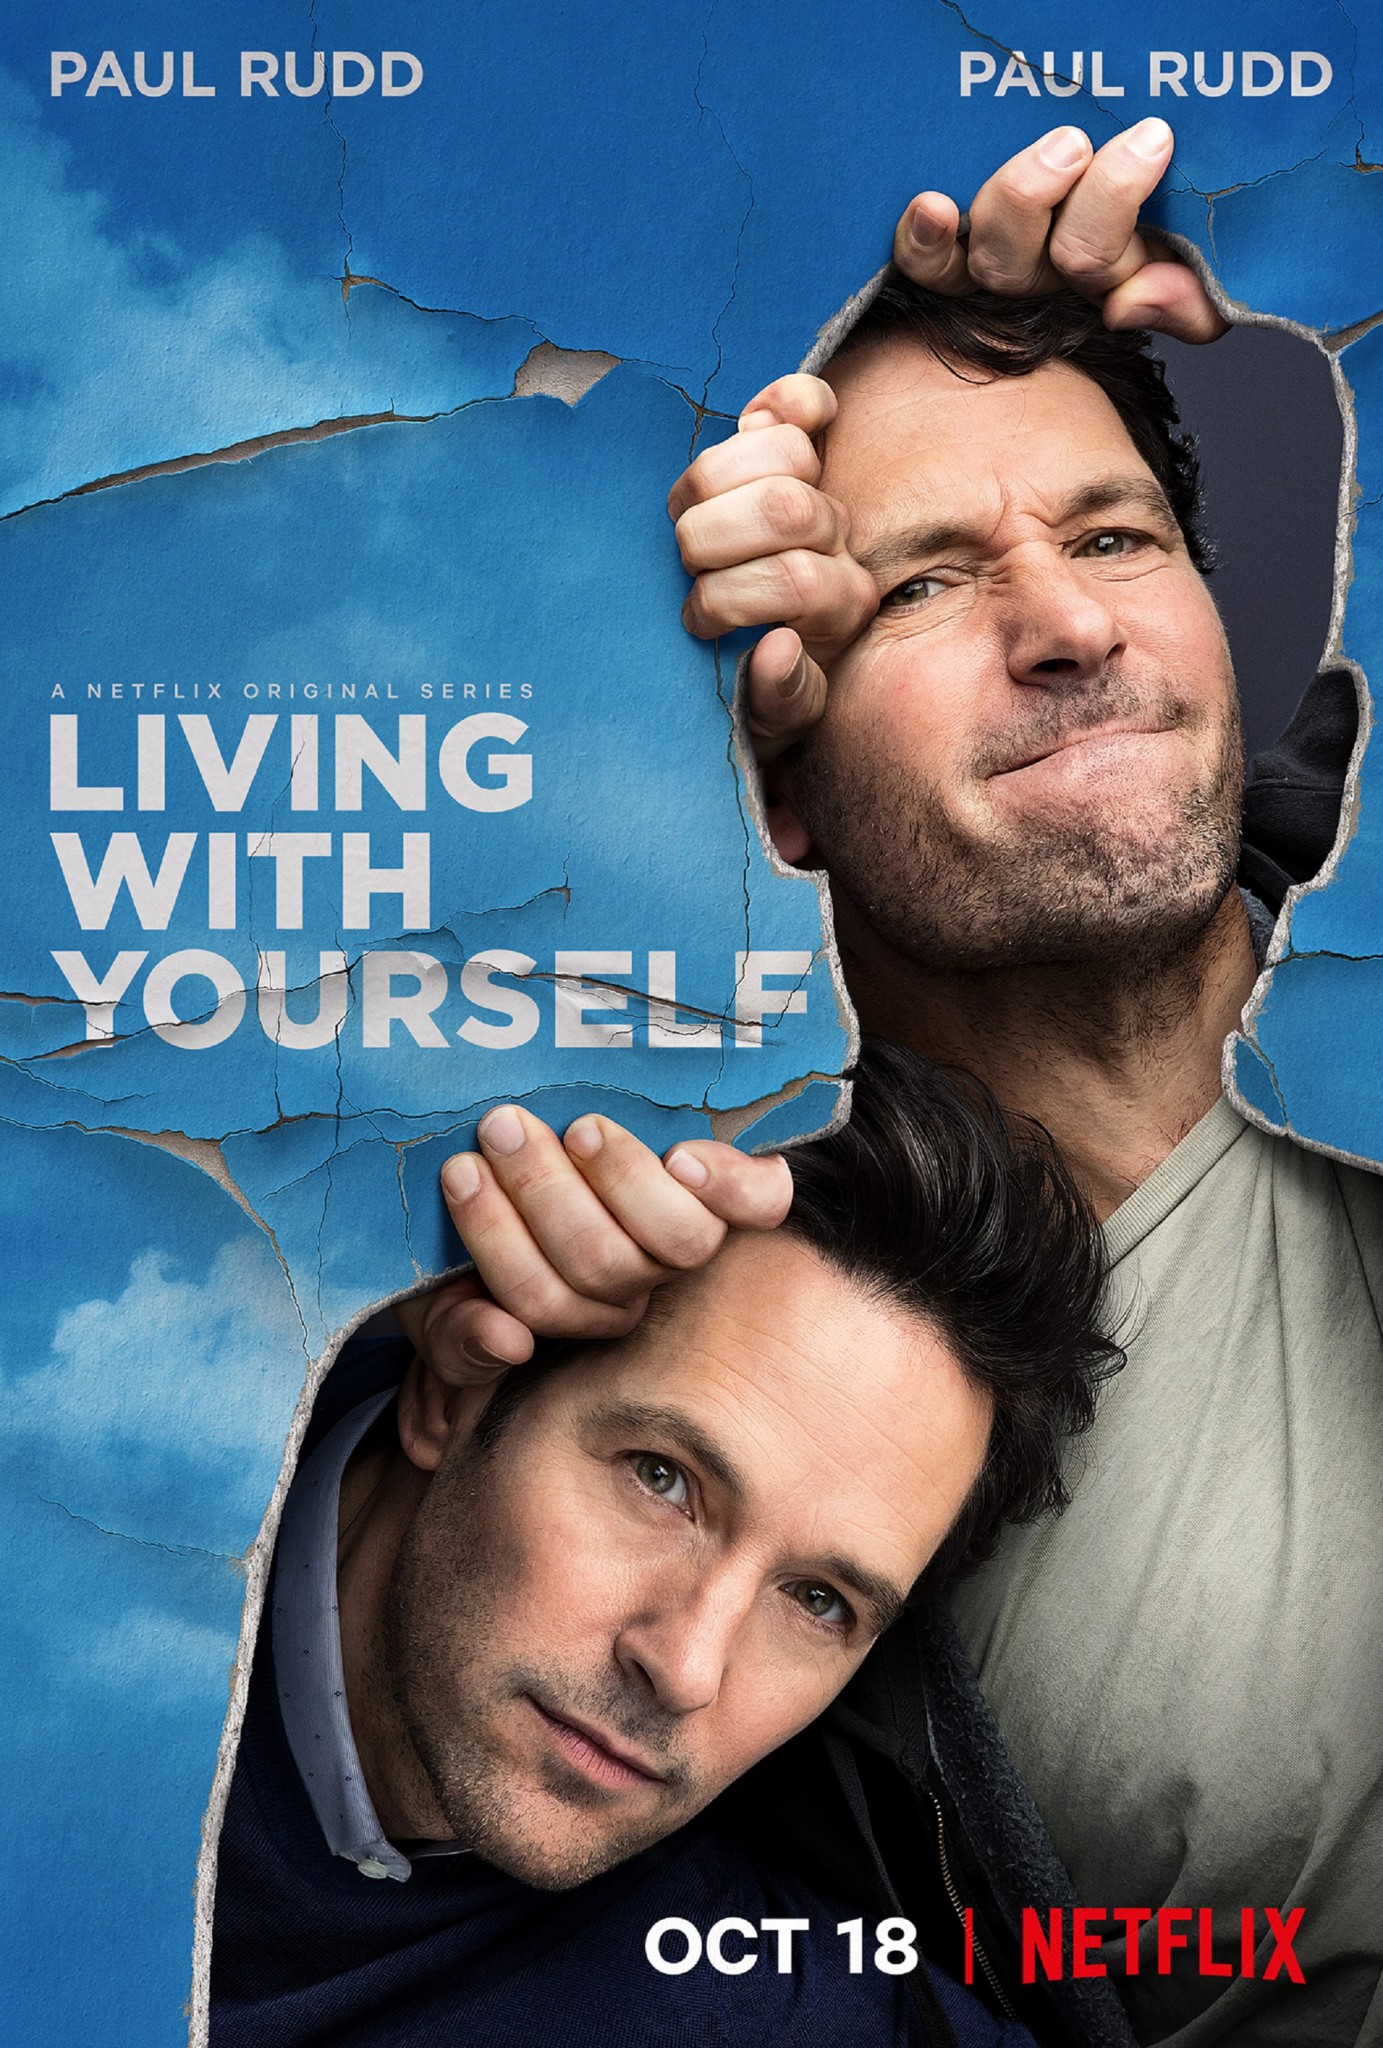 Two Paul Rudds Make for Double the Trouble in 'Living With Yourself